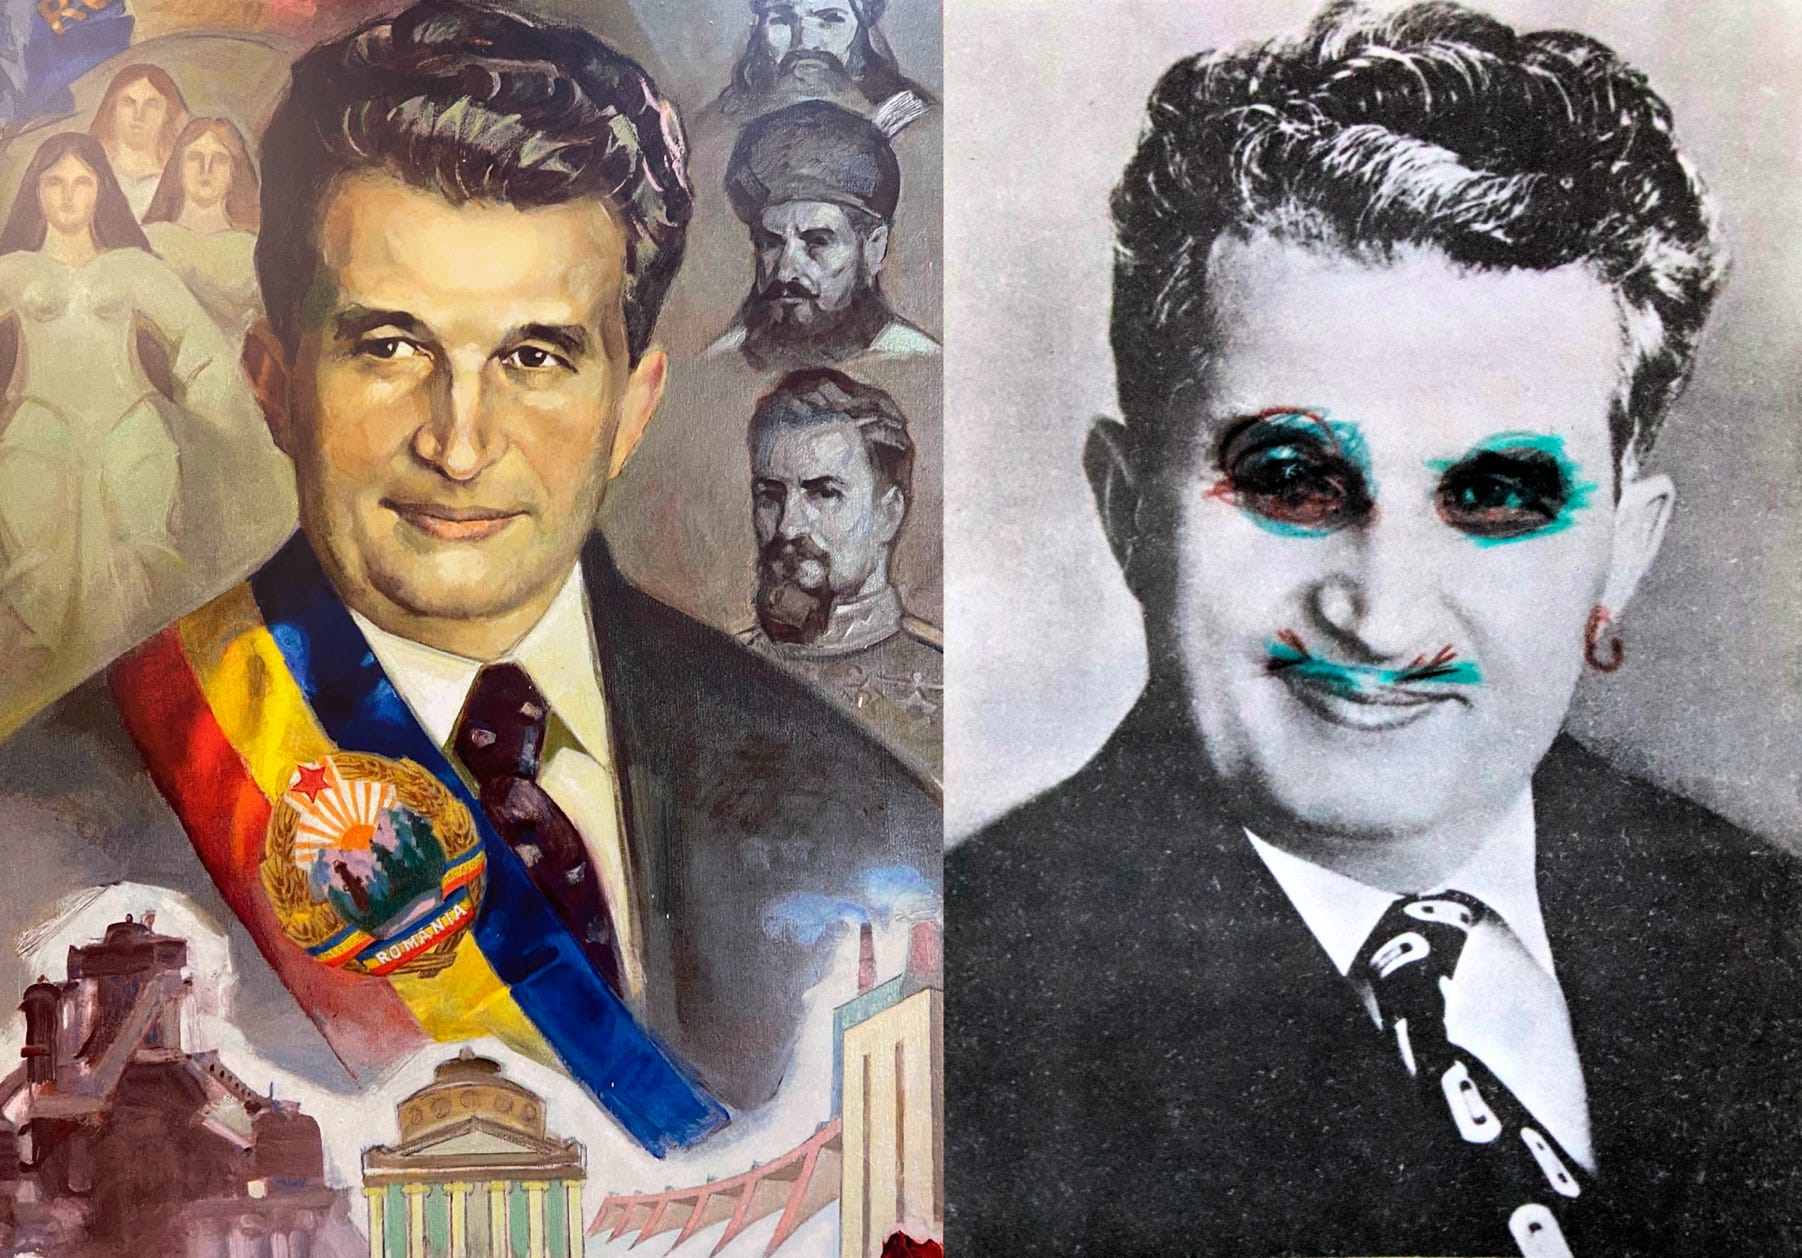 (Left): “The Genius of the Carpathians” – one of Nicolae Ceaușescu’s many personality cult posters from his time as leader. (Right): Ceauşescu’s image appeared at the front of most books published in Romania during his period in power.  This example was defaced after his fall from power by the owner of the book, a 1983 scientific manual issued by the Ministry of Education and Training.  